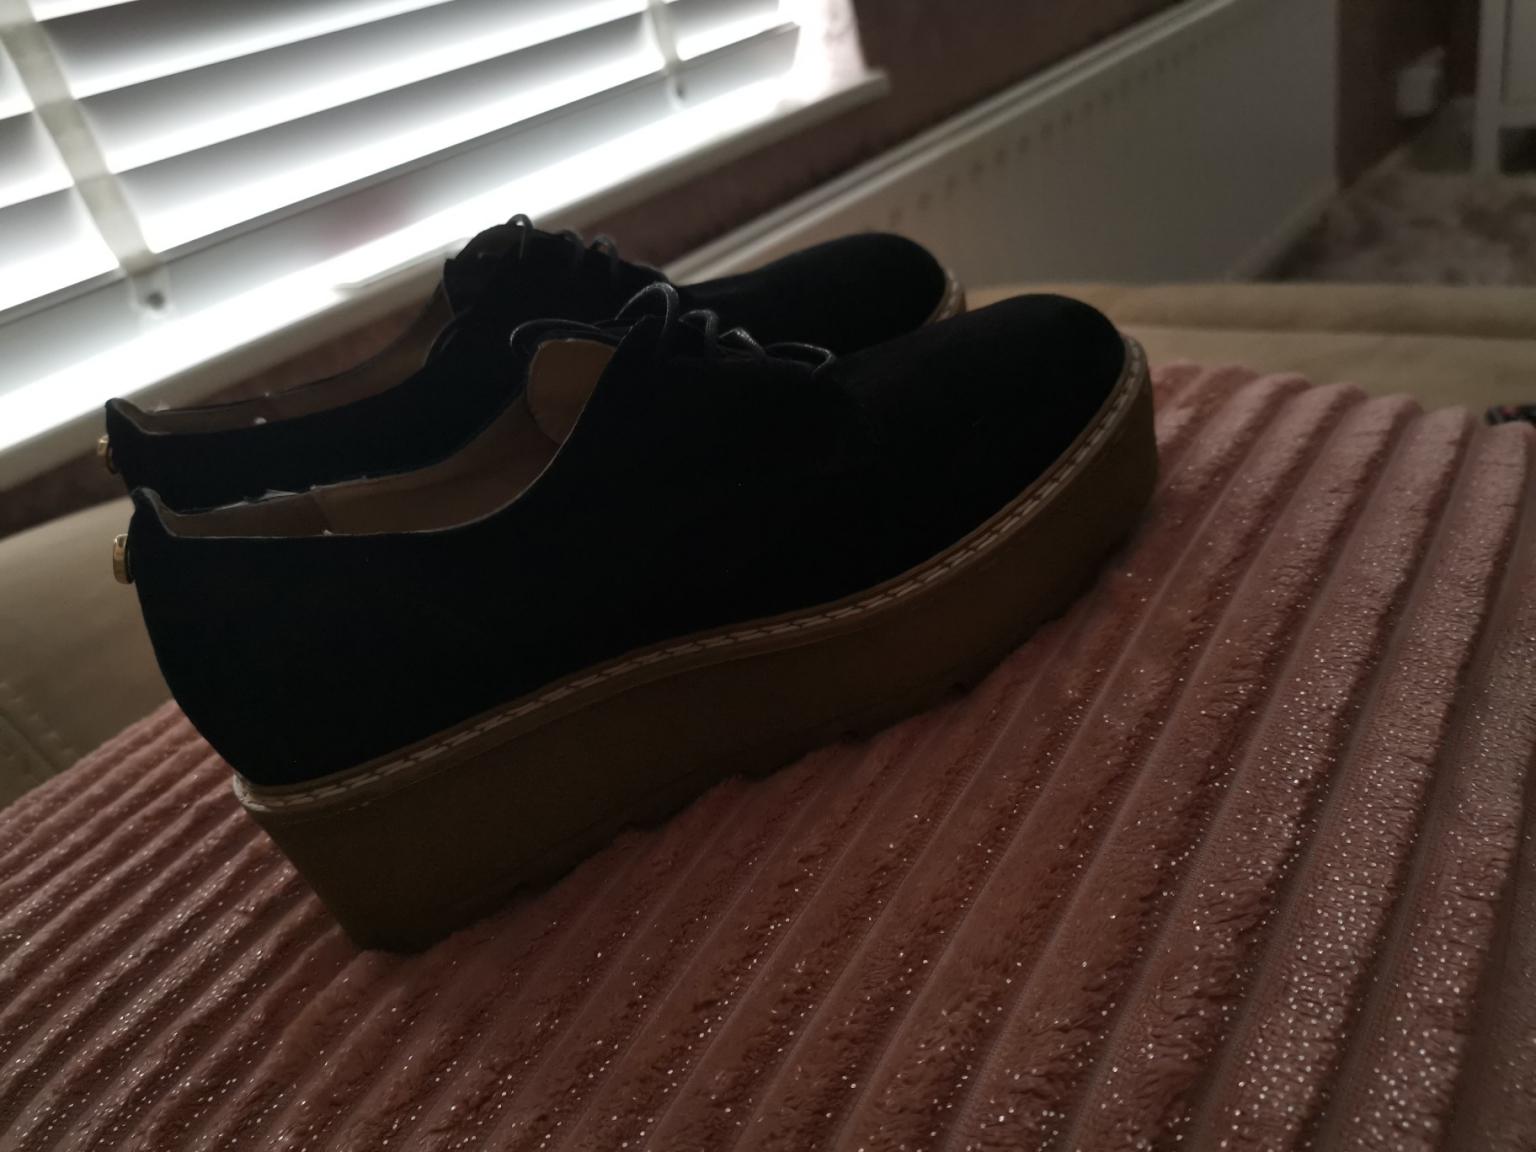 russell and bromley flatforms